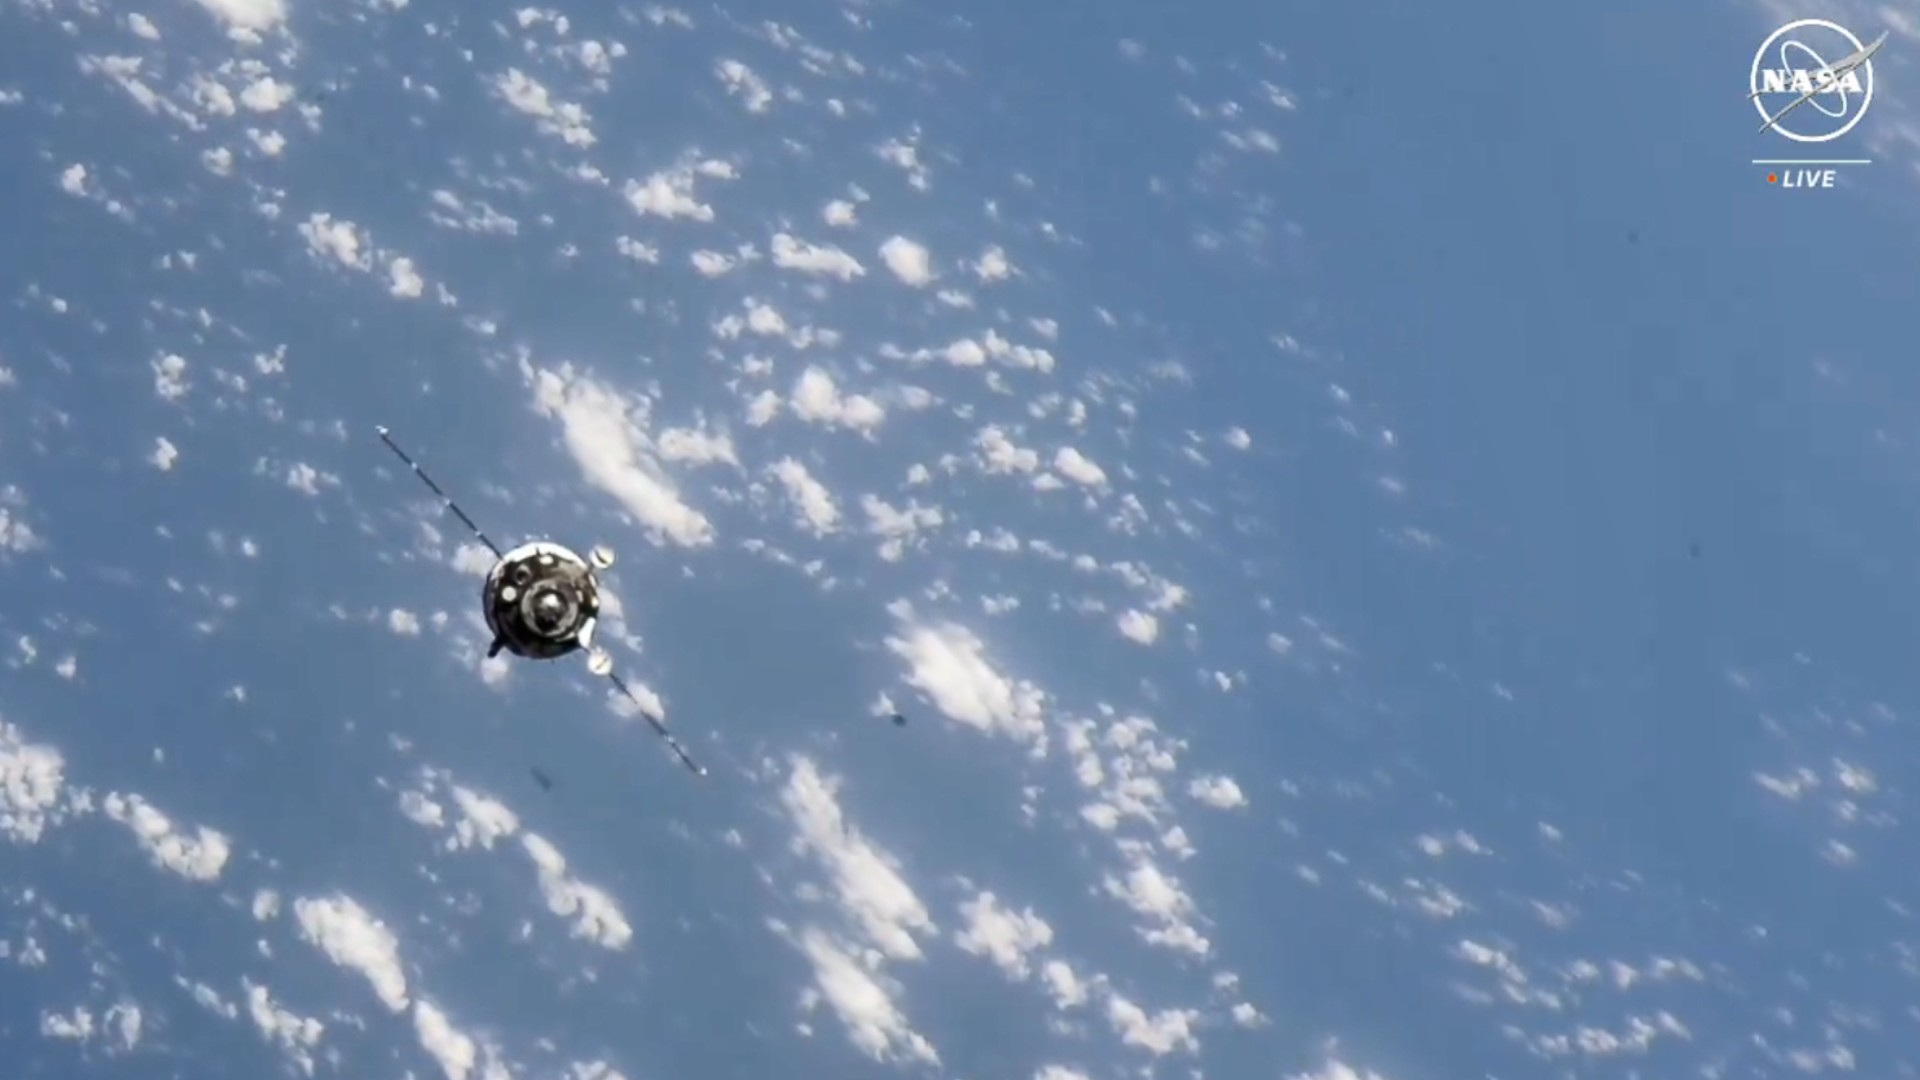 3 spaceflyers arrive at the ISS aboard Russian Soyuz spacecraft Space